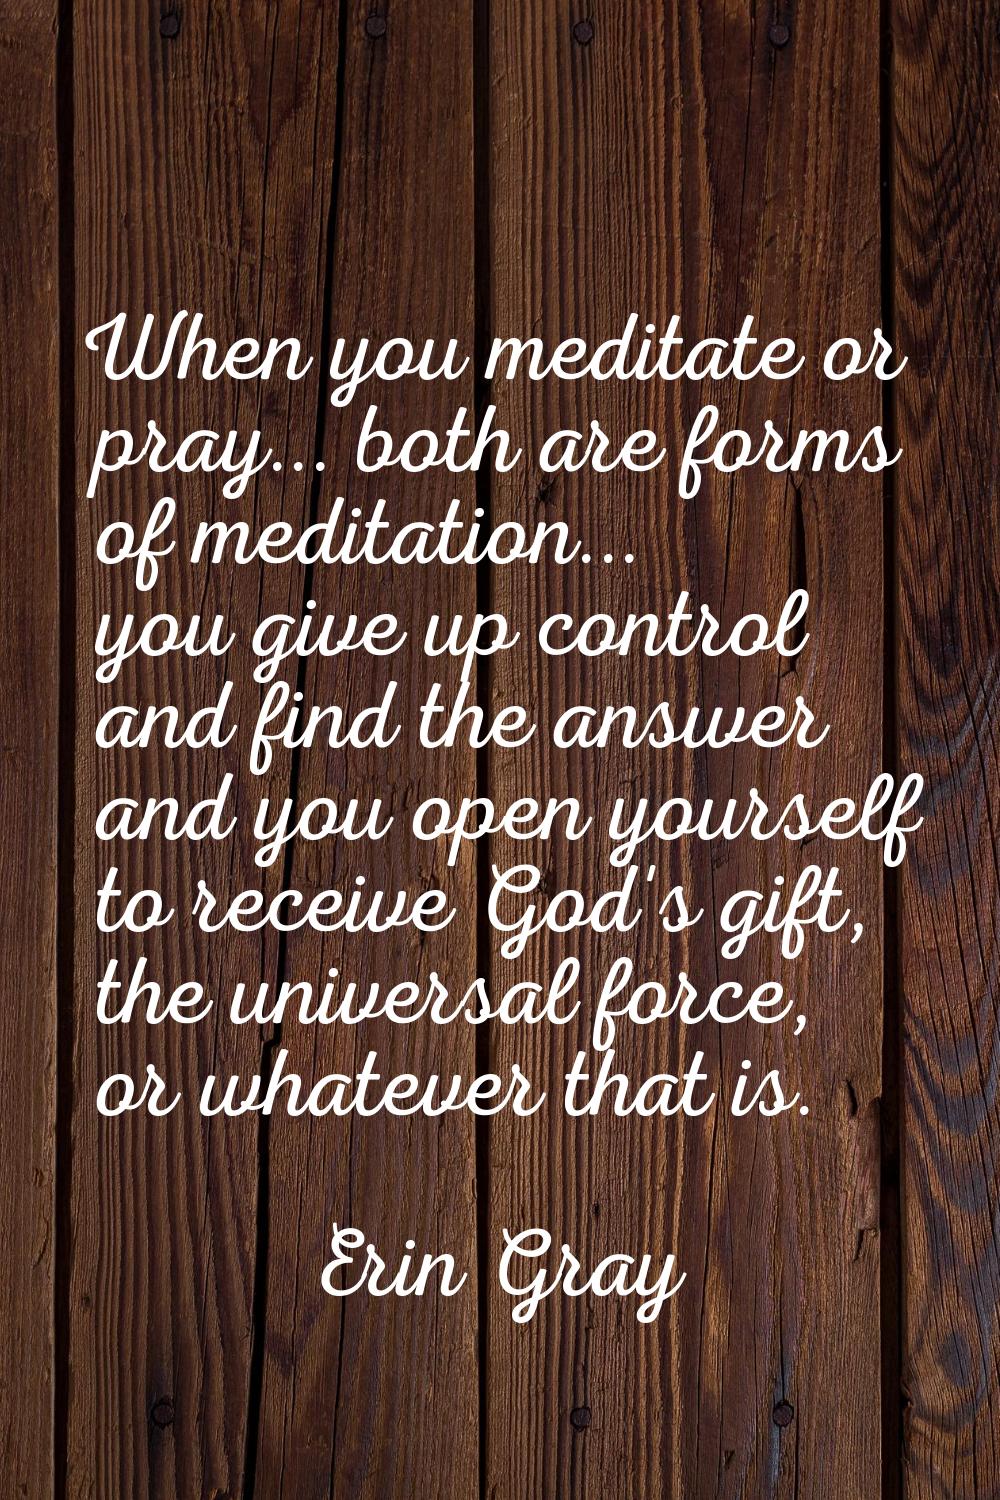 When you meditate or pray... both are forms of meditation... you give up control and find the answe